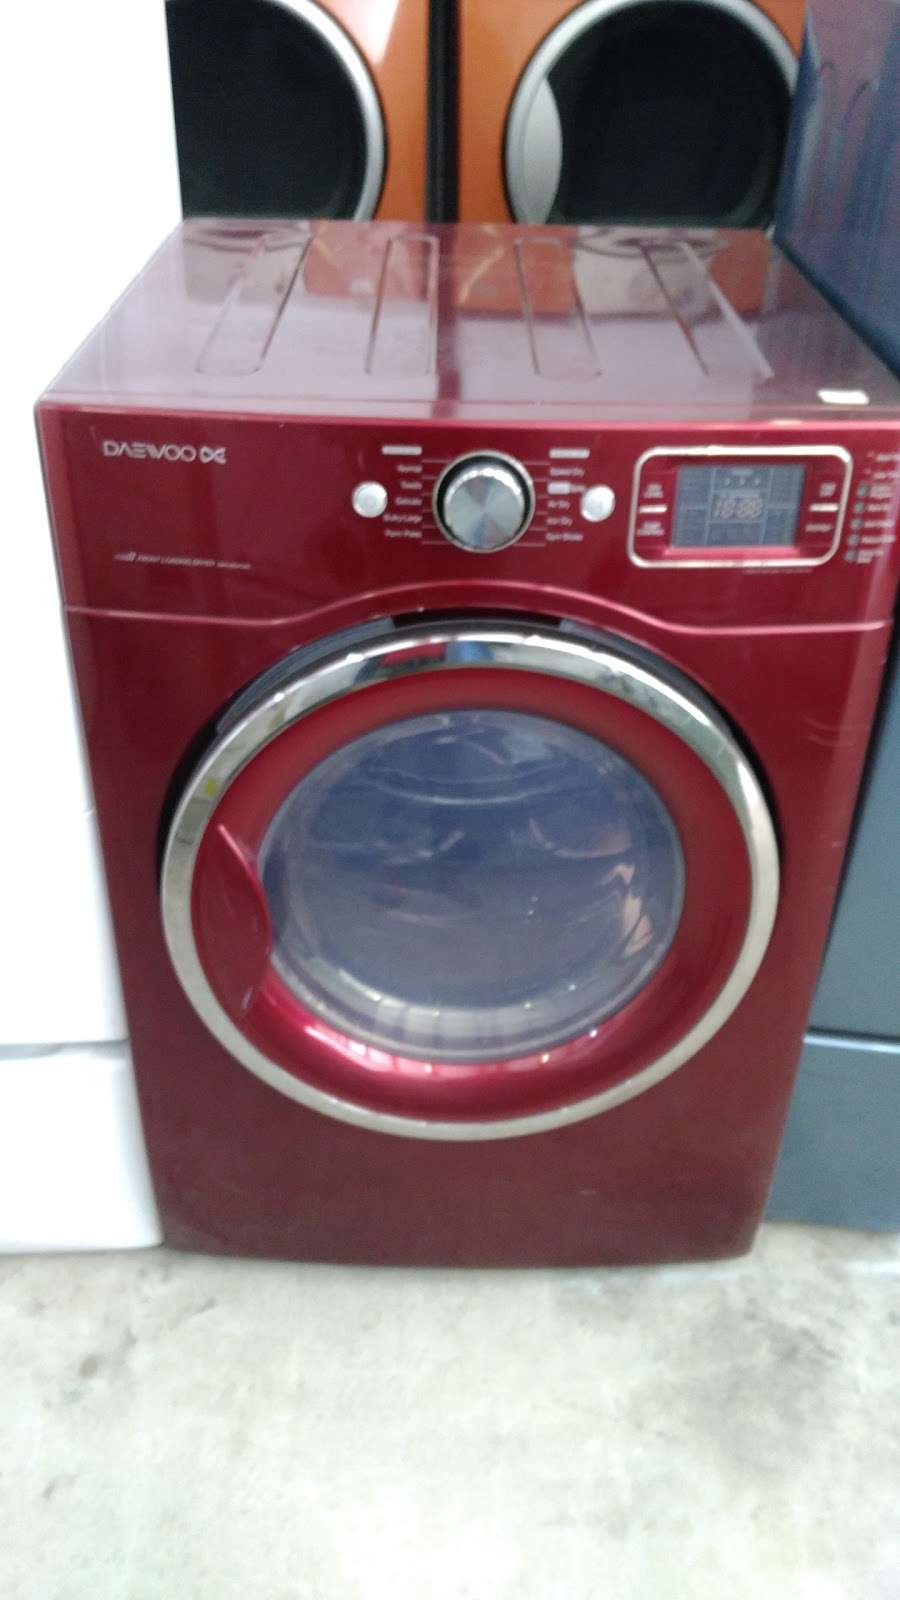 Quality Used Appliances | Photo 5 of 10 | Address: 7590 E Hwy 25, Belleview, FL 34420, USA | Phone: (352) 434-2204